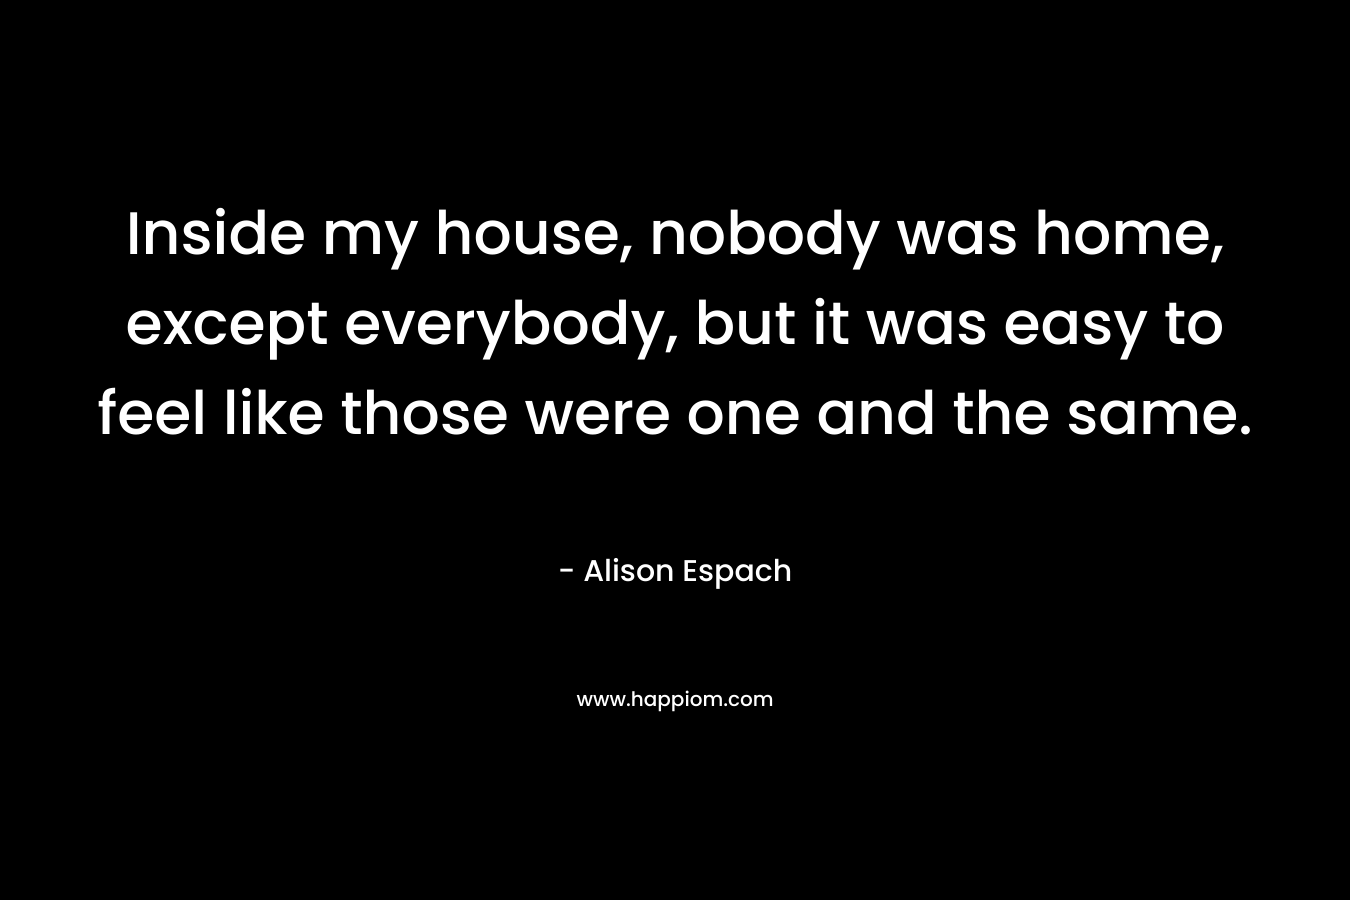 Inside my house, nobody was home, except everybody, but it was easy to feel like those were one and the same. – Alison Espach